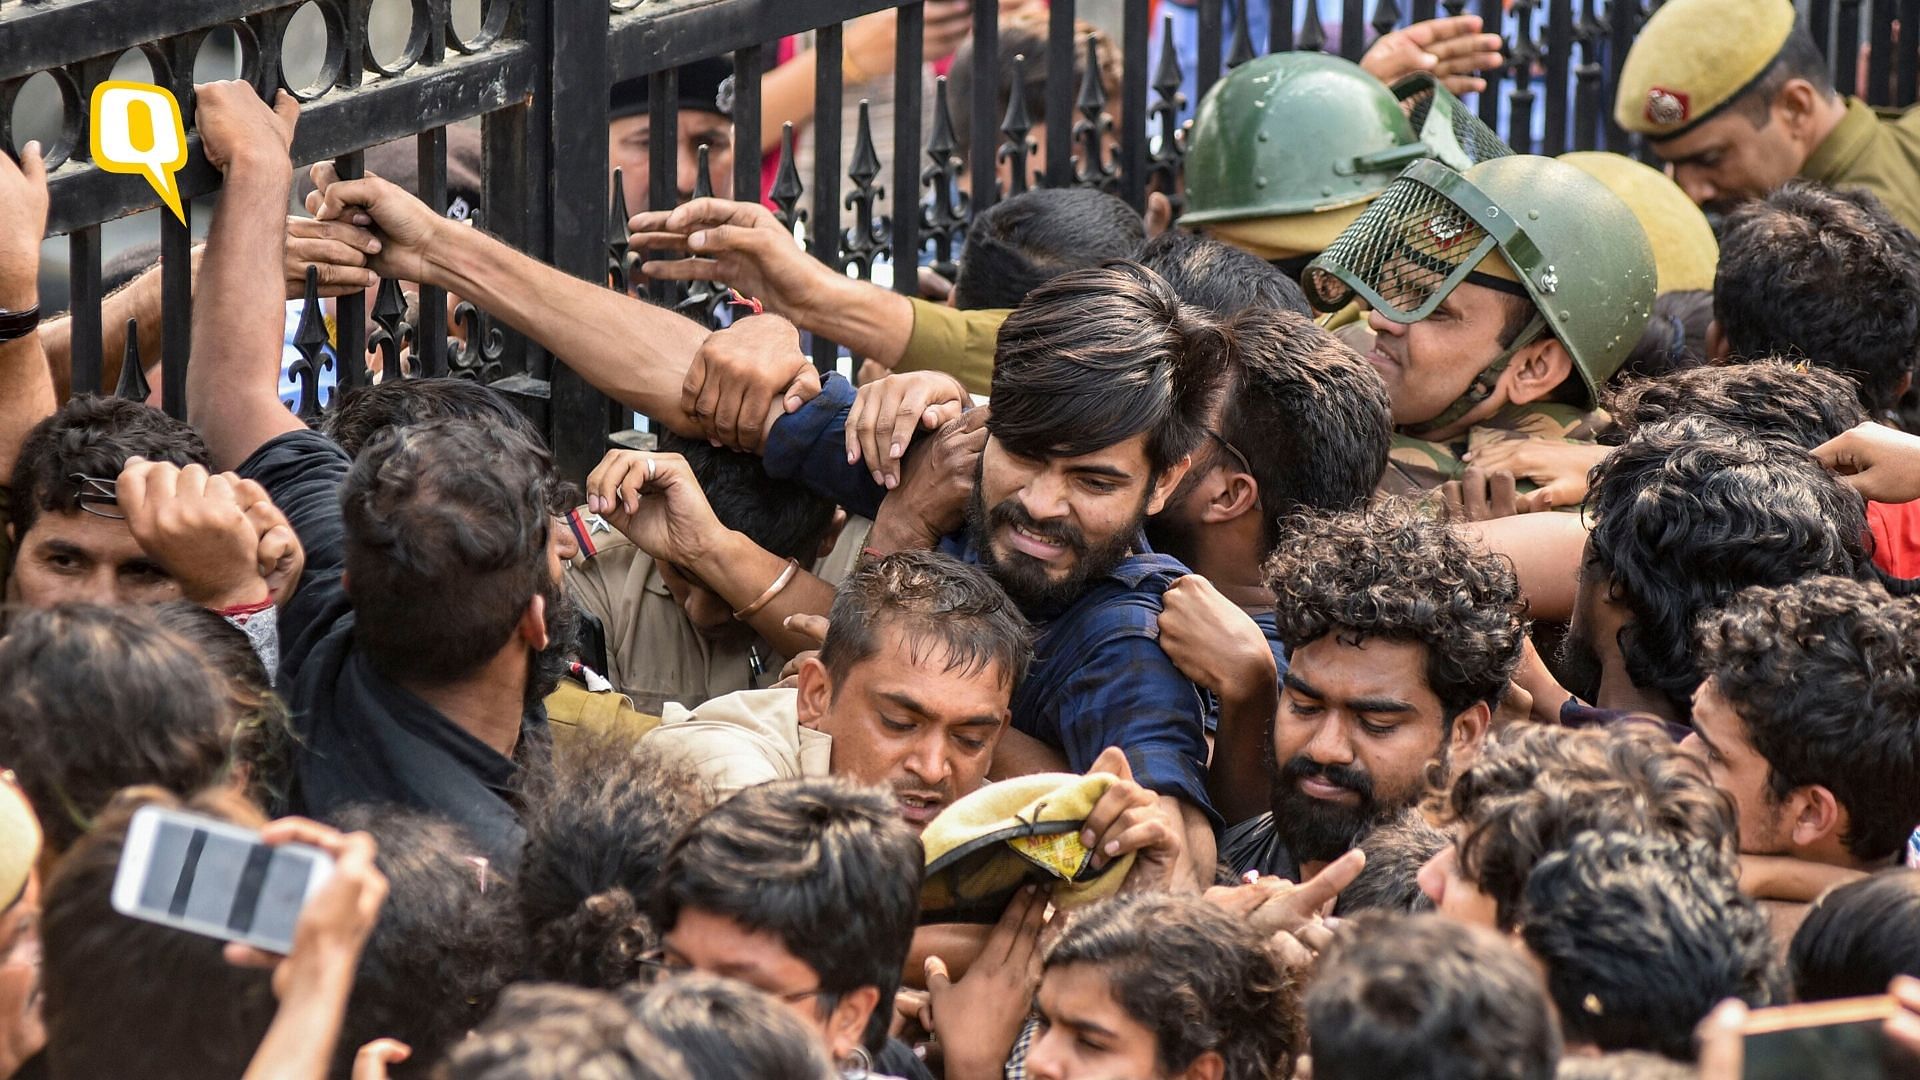 Clashes broke out between JNU students and Police as their protest over hostel fee hike escalated. 